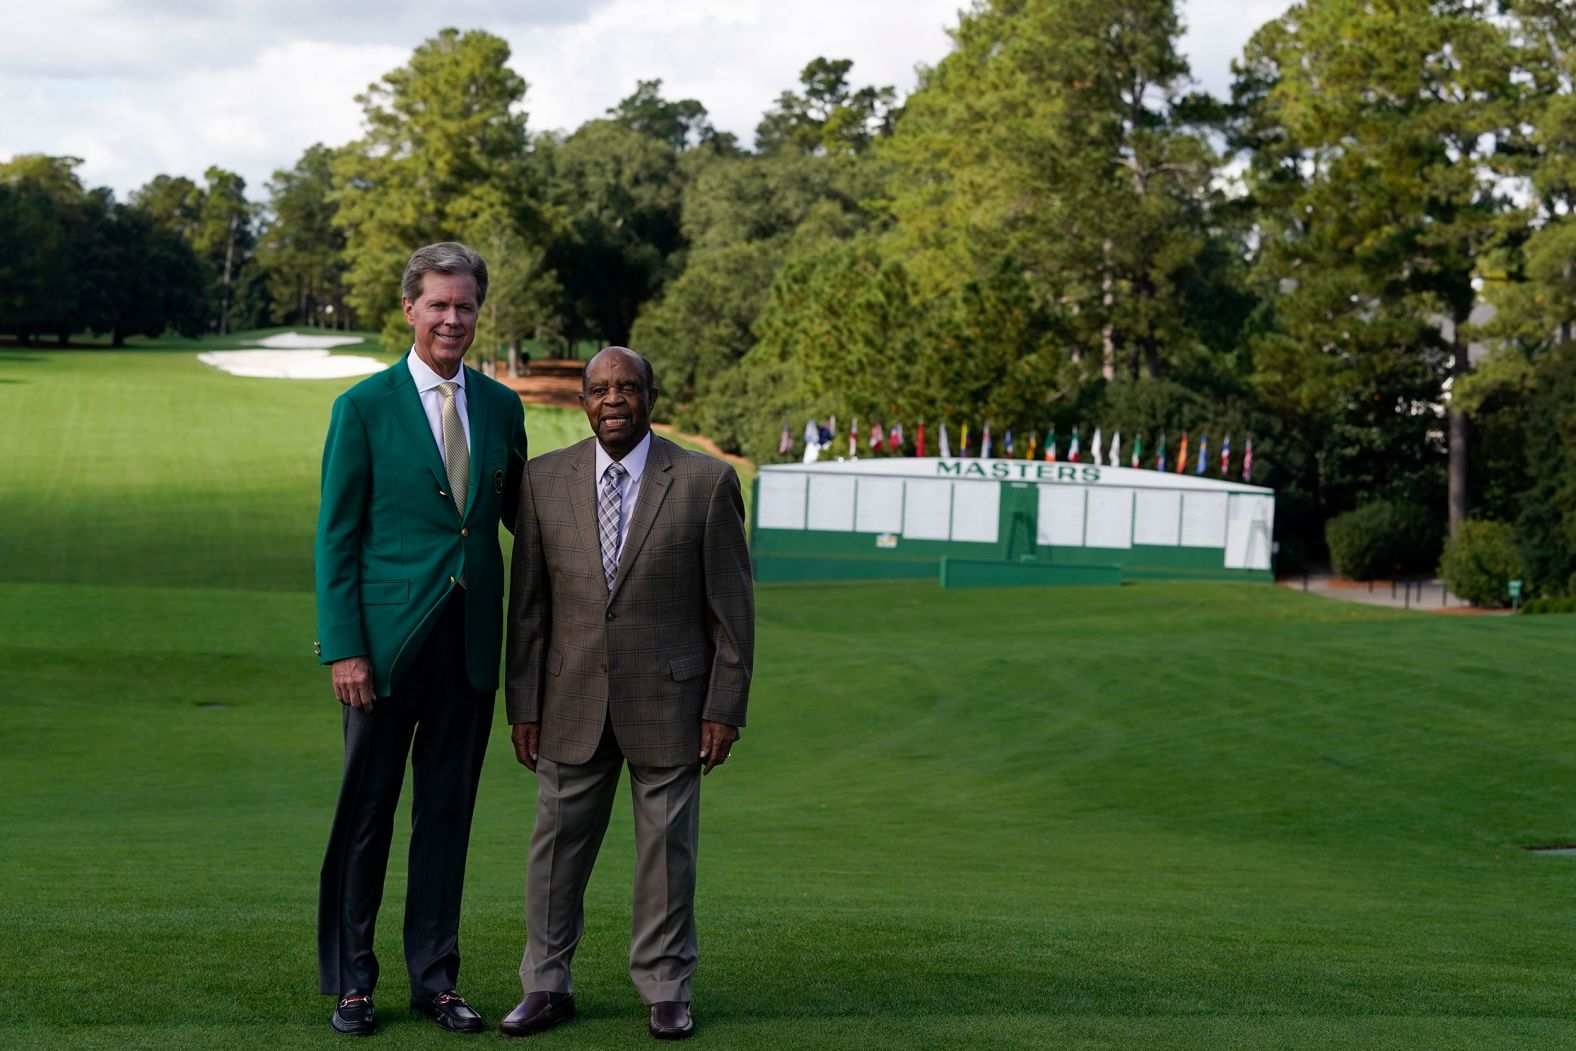 Elder and Fred Ridley, chairman of Augusta National Golf Club, pose for a picture at the 2020 Masters. The Masters was honoring Elder by announcing scholarships at local colleges in his name.